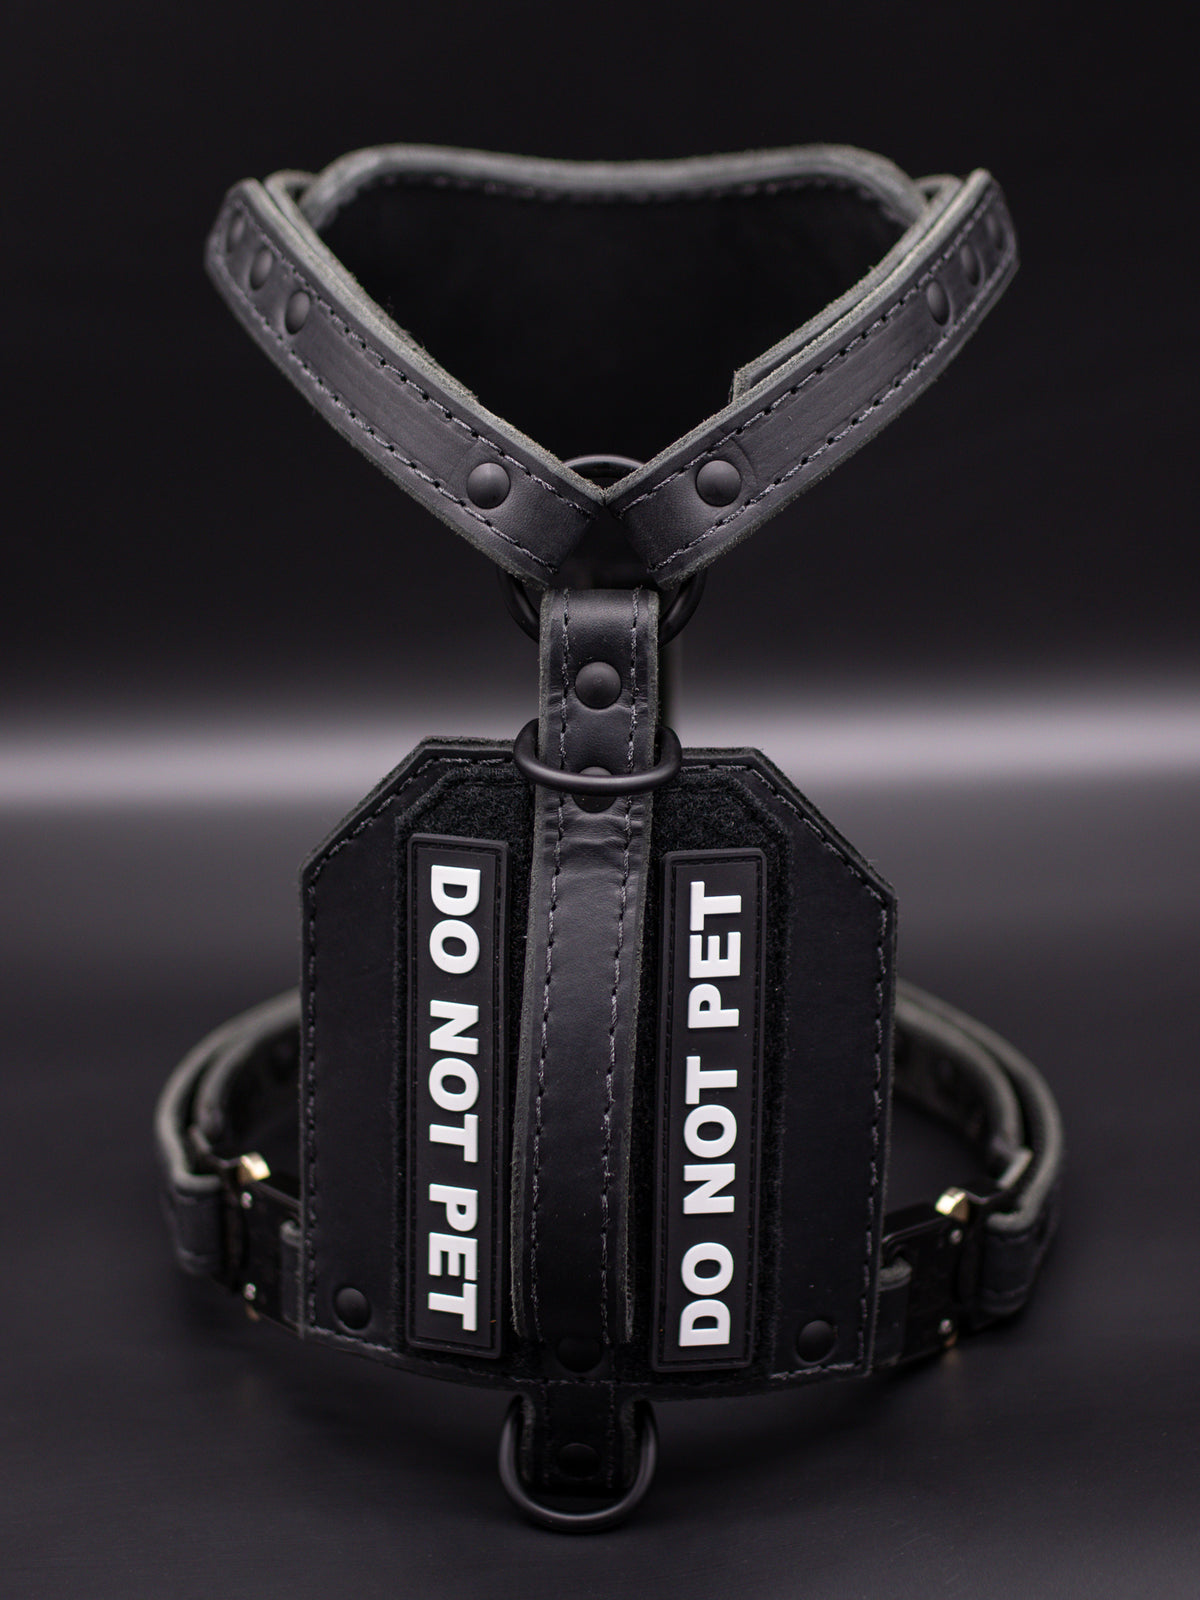 The Renegade Harness V2